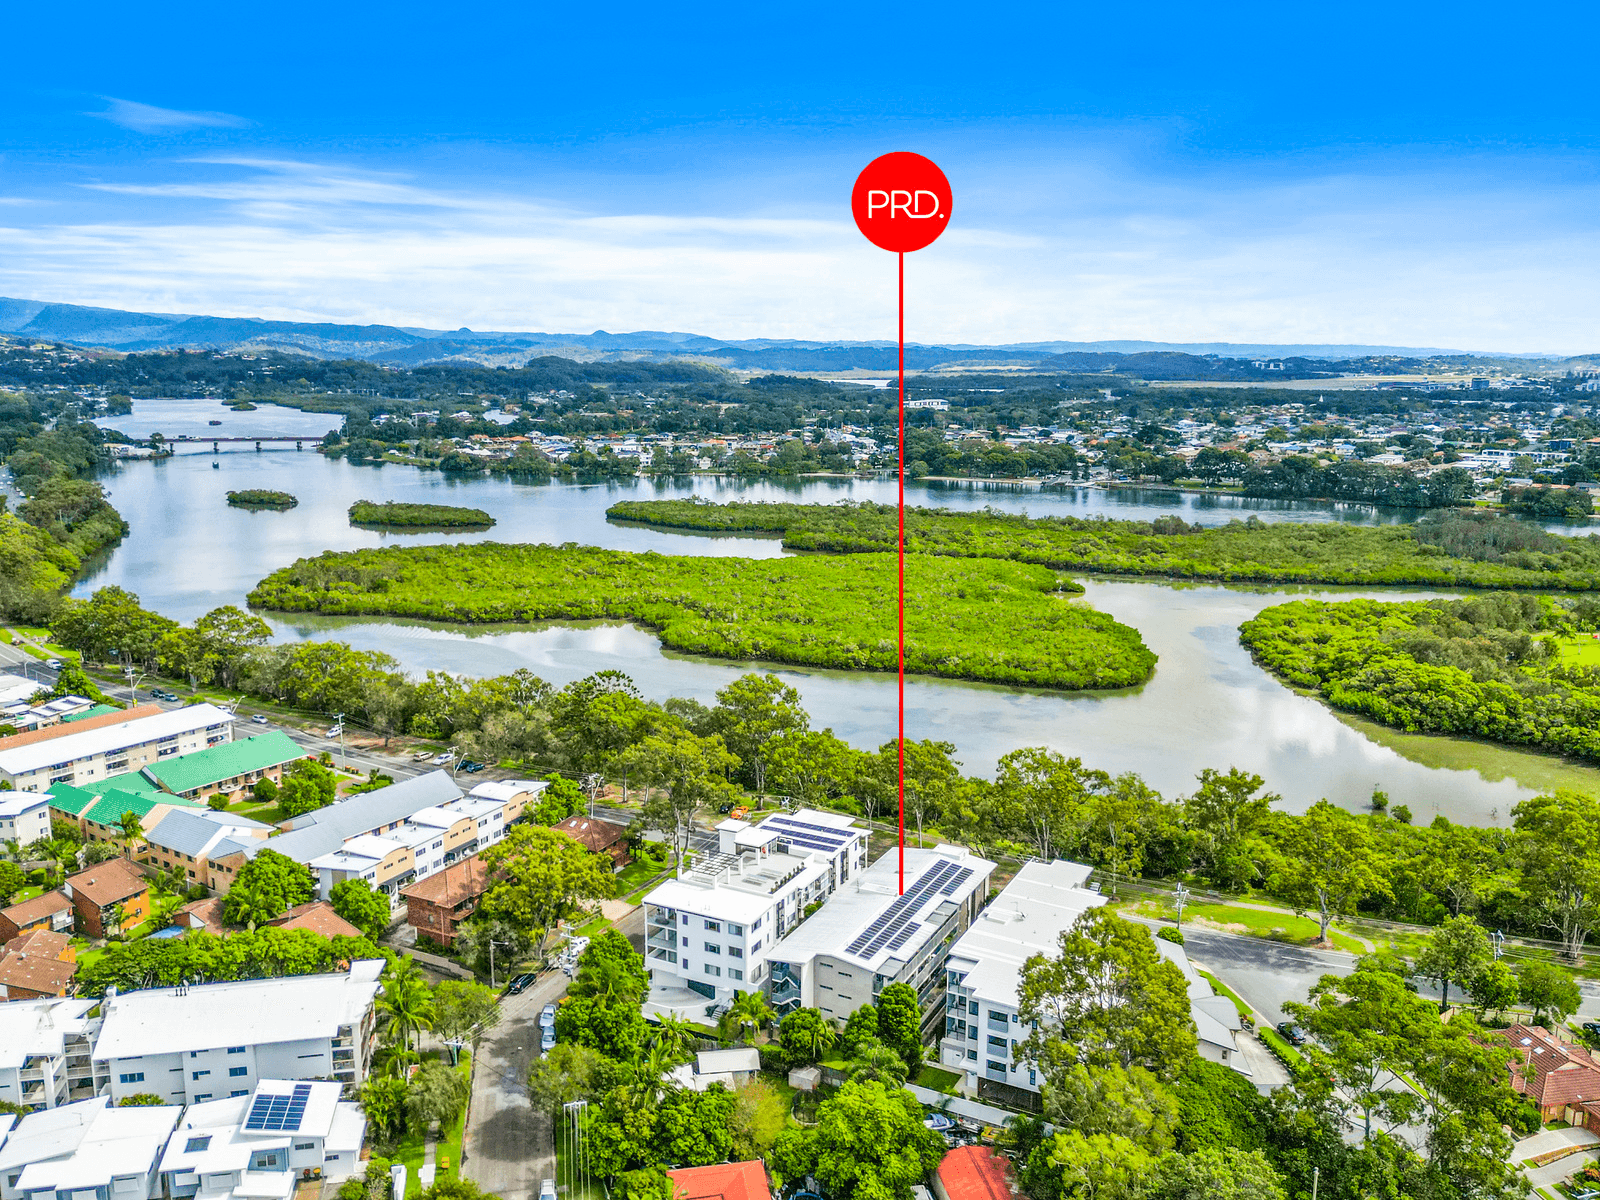 8/34 Dry Dock Road, TWEED HEADS SOUTH, NSW 2486